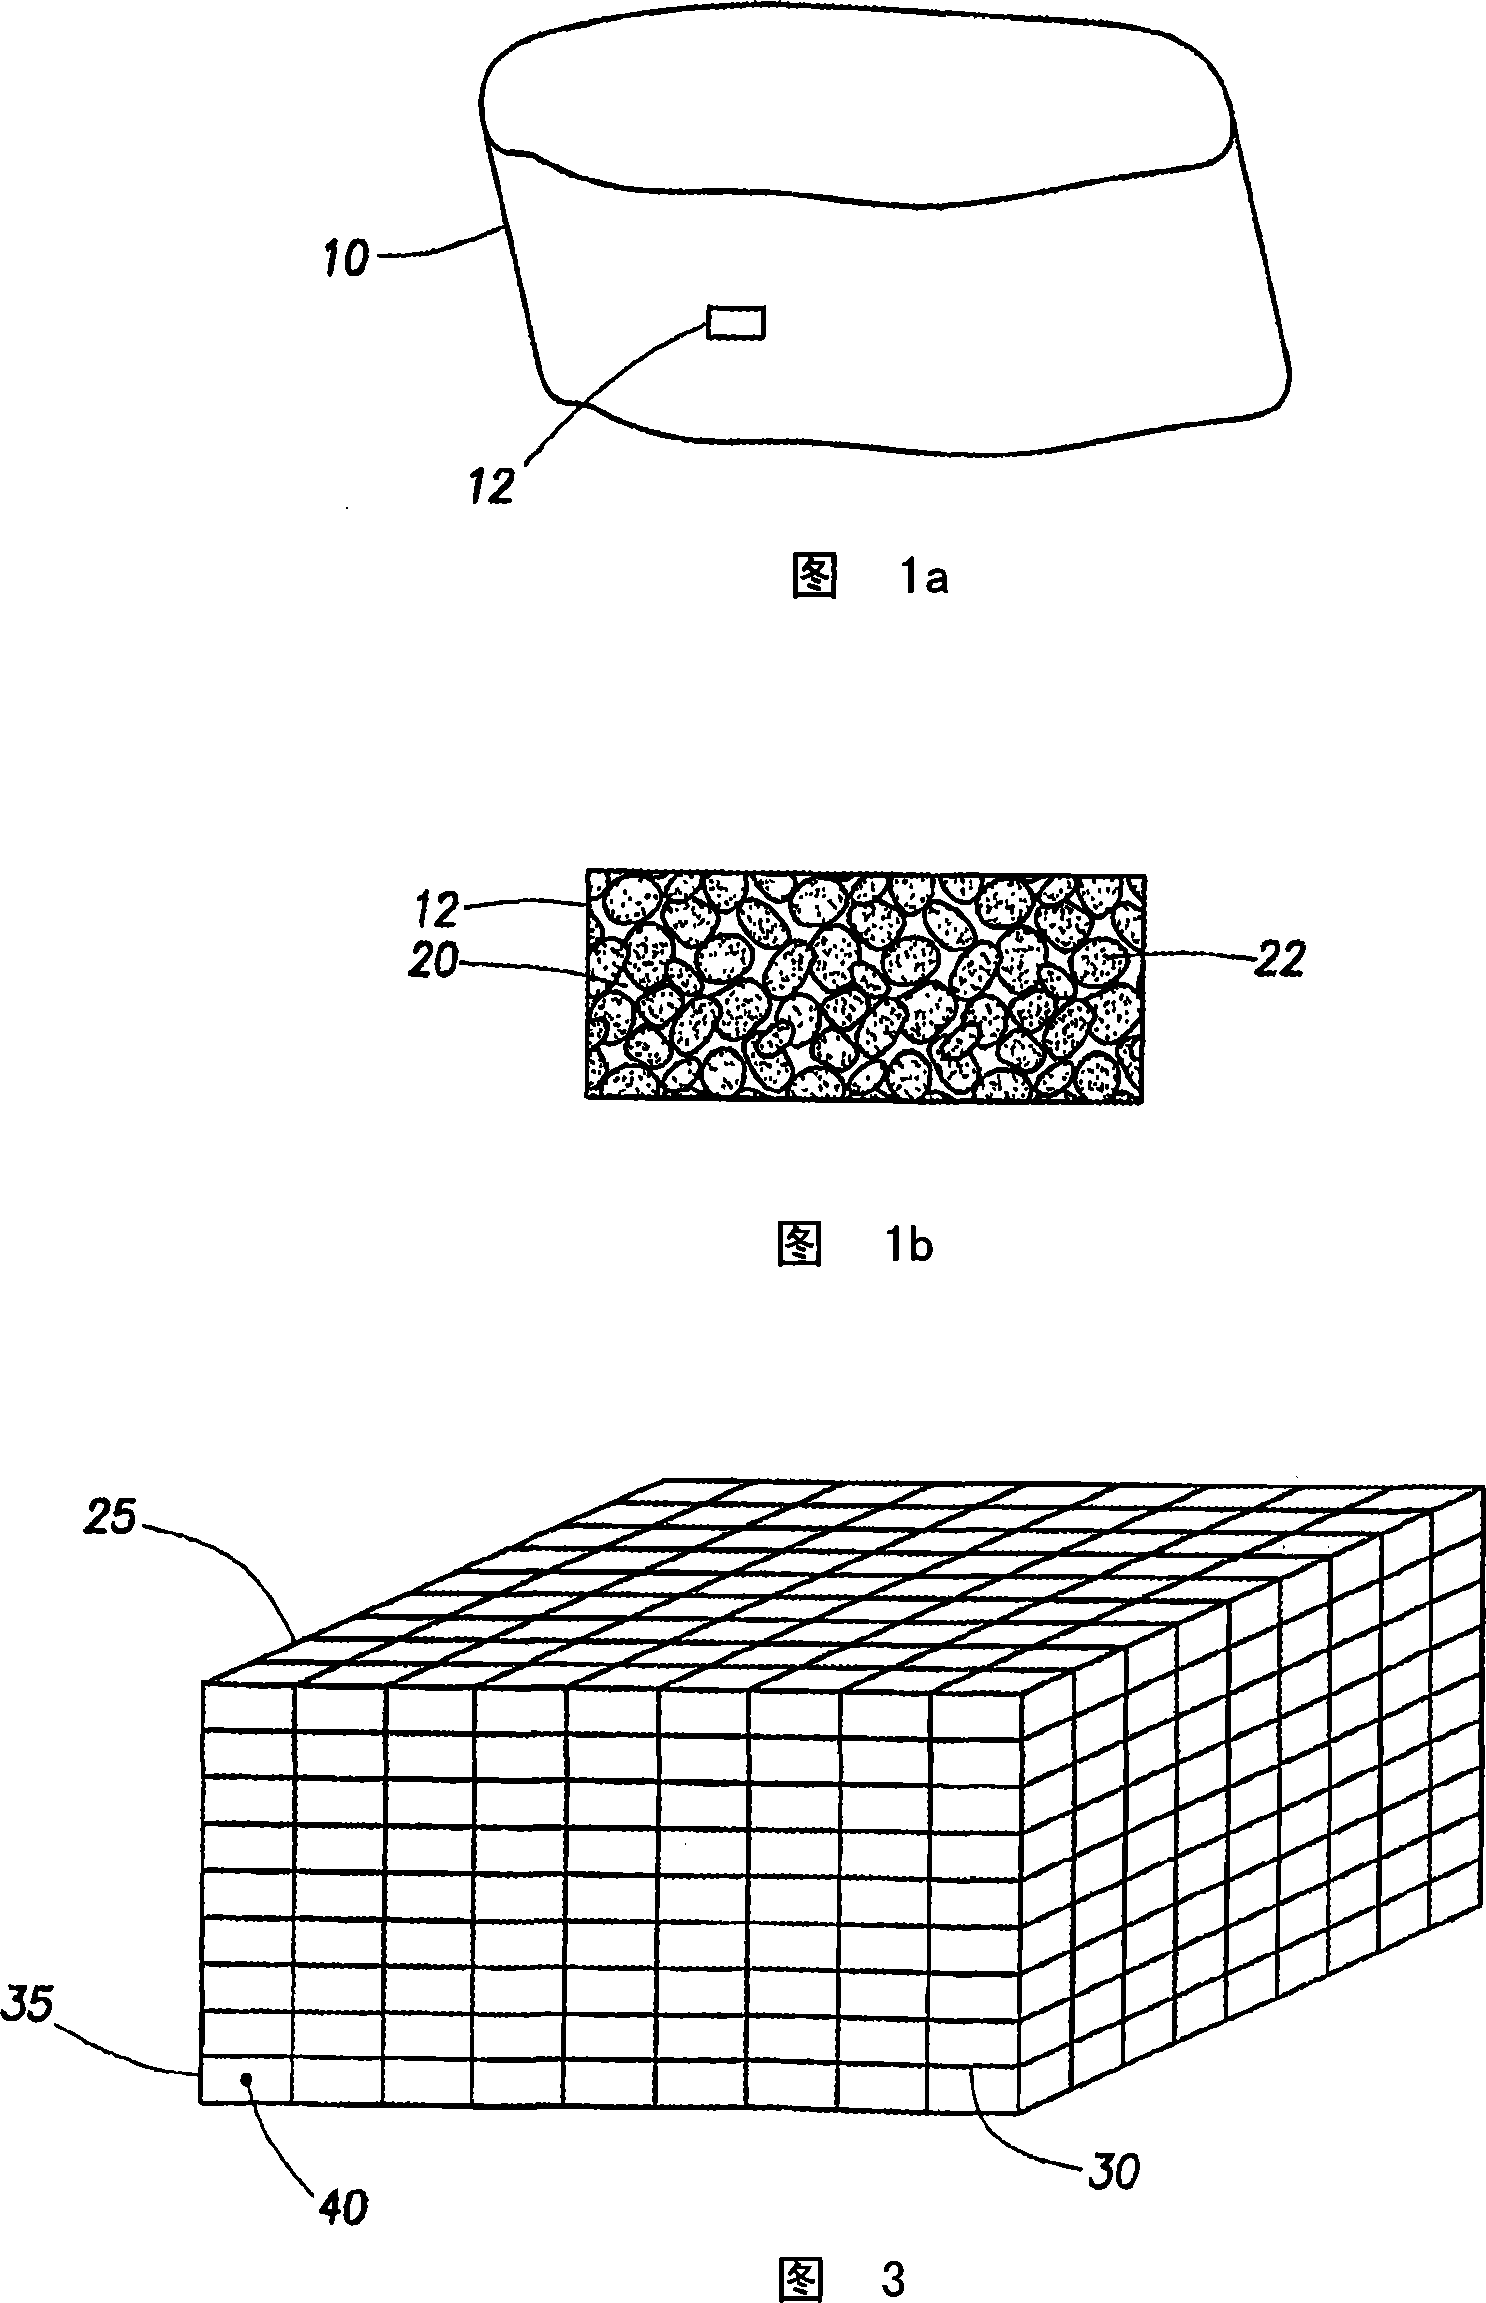 Apparatus, method and system for improved reservoir simulation using an algebraic cascading class linear solver